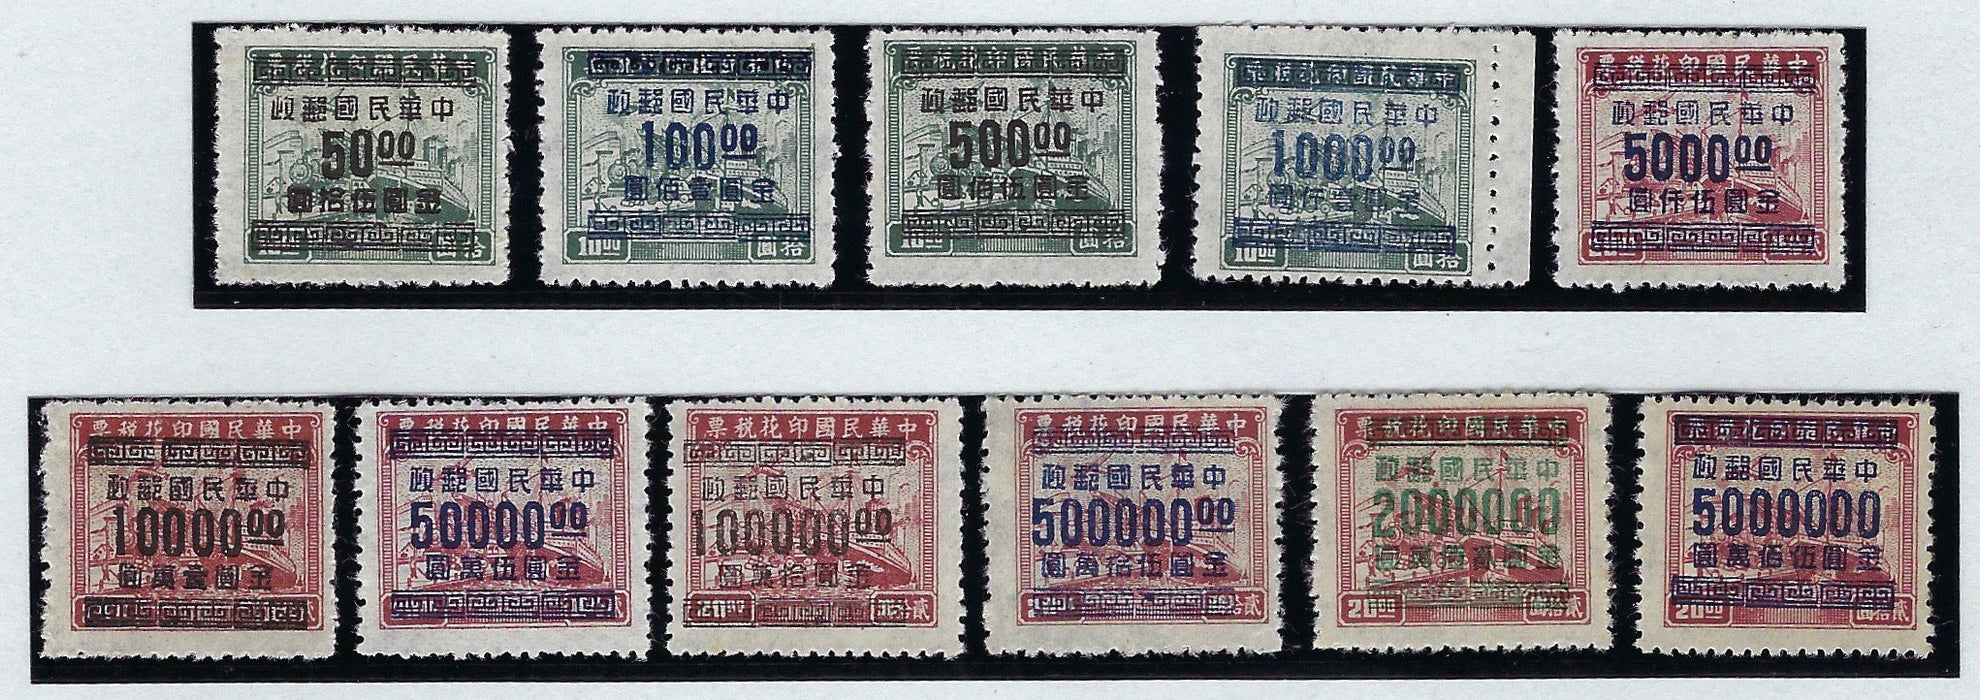 China 1949 (Apr) Hankow Gold Yuan surcharges on 'Transport' revenue stamps, SG1183/93